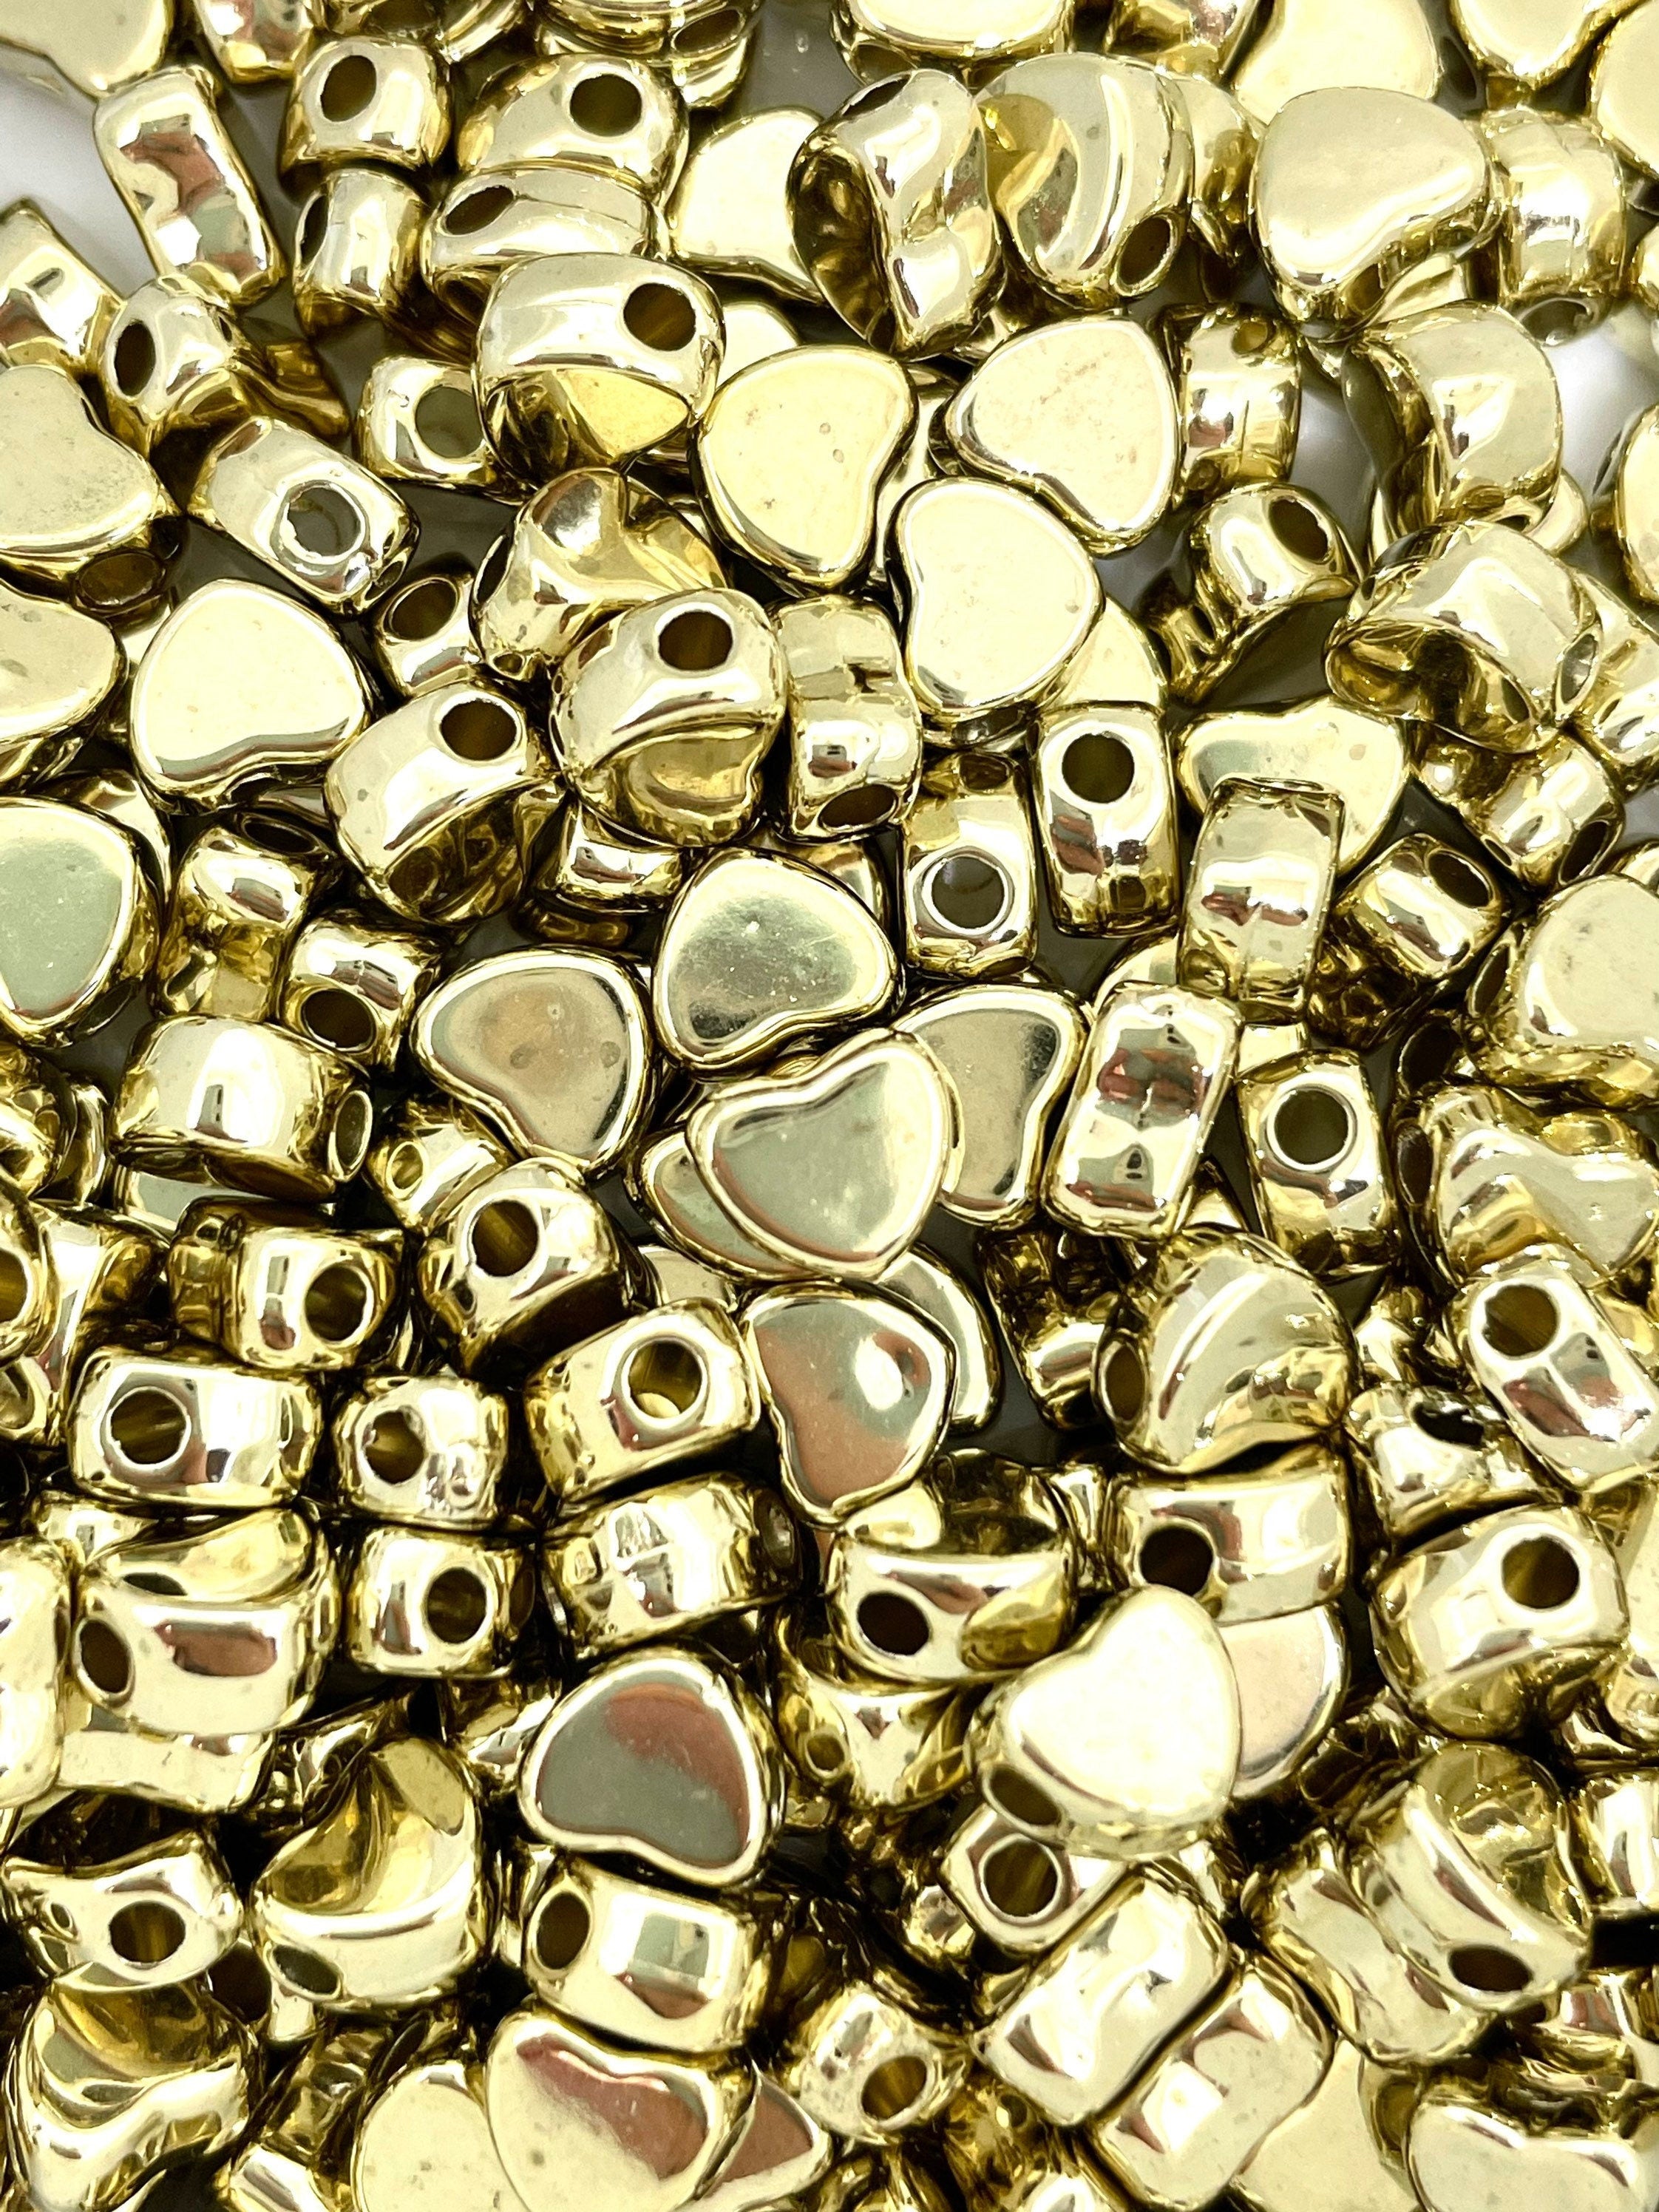 Small Gold Heart Beads, Gold Spacer Beads, Heart Shaped Beads for